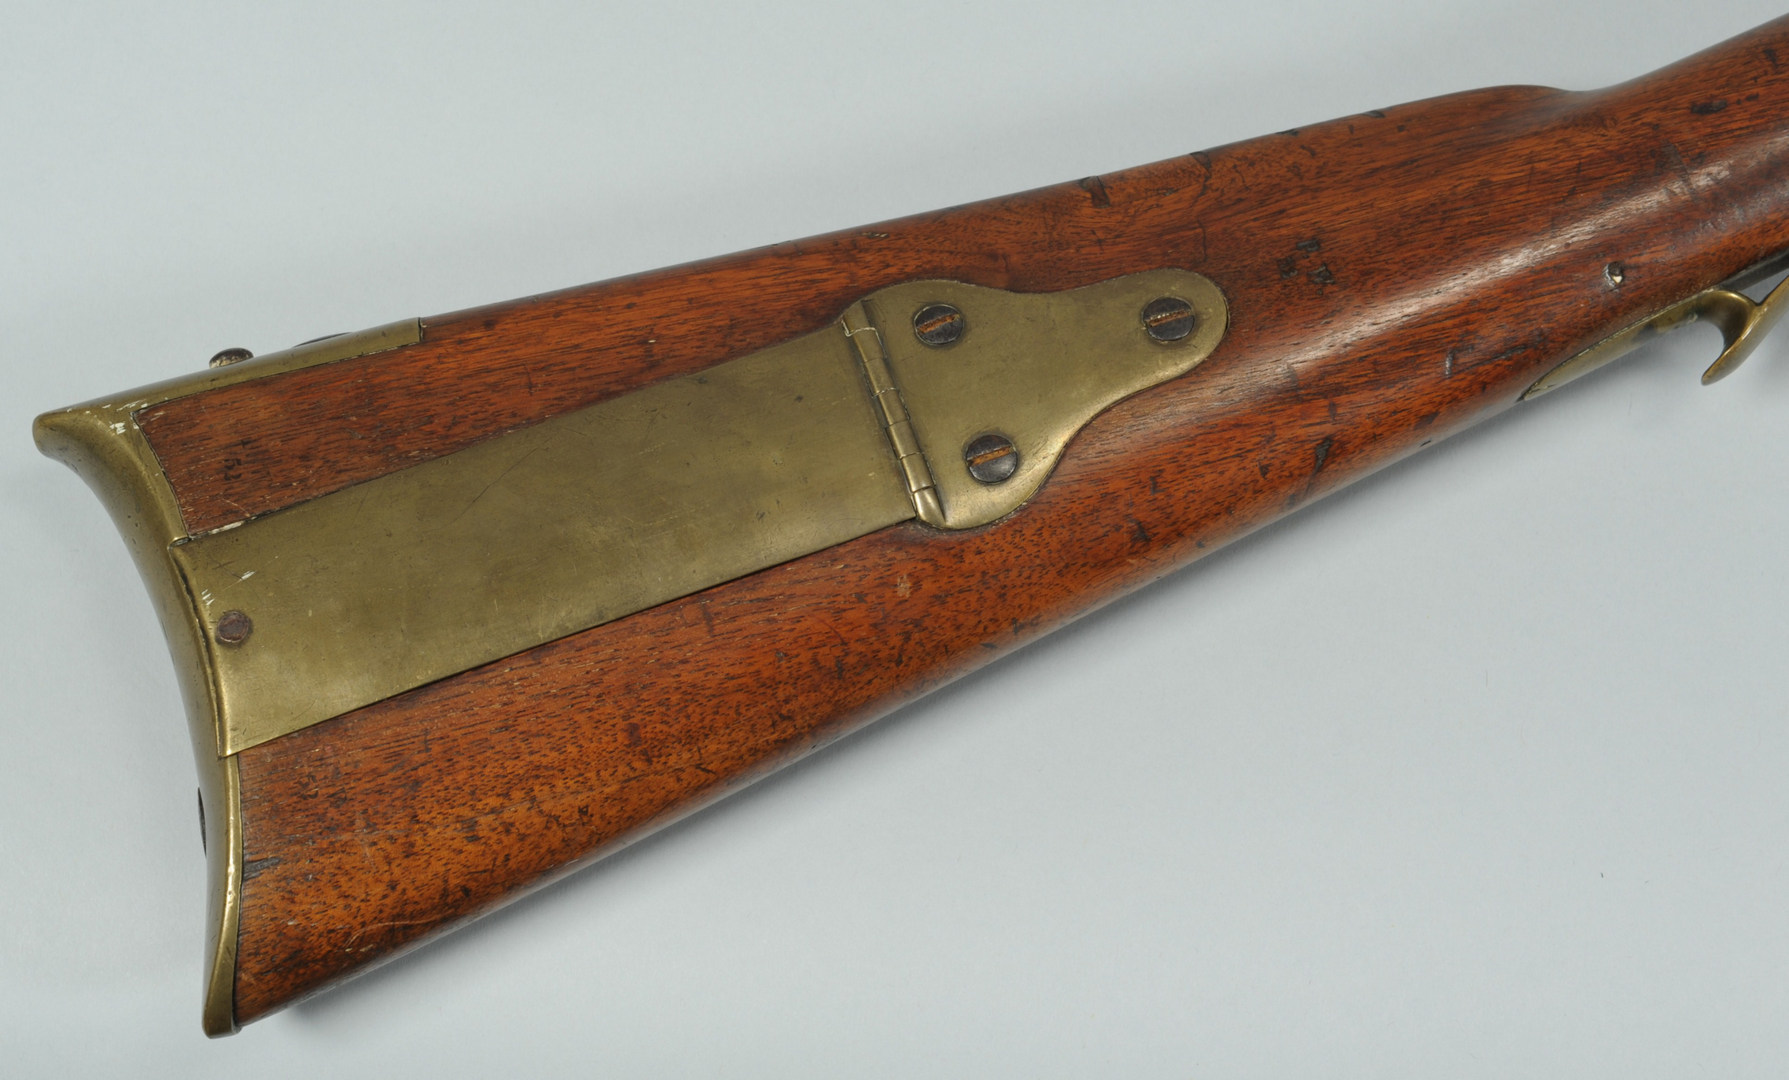 Lot 518: 1803 Harpers Ferry Rifle